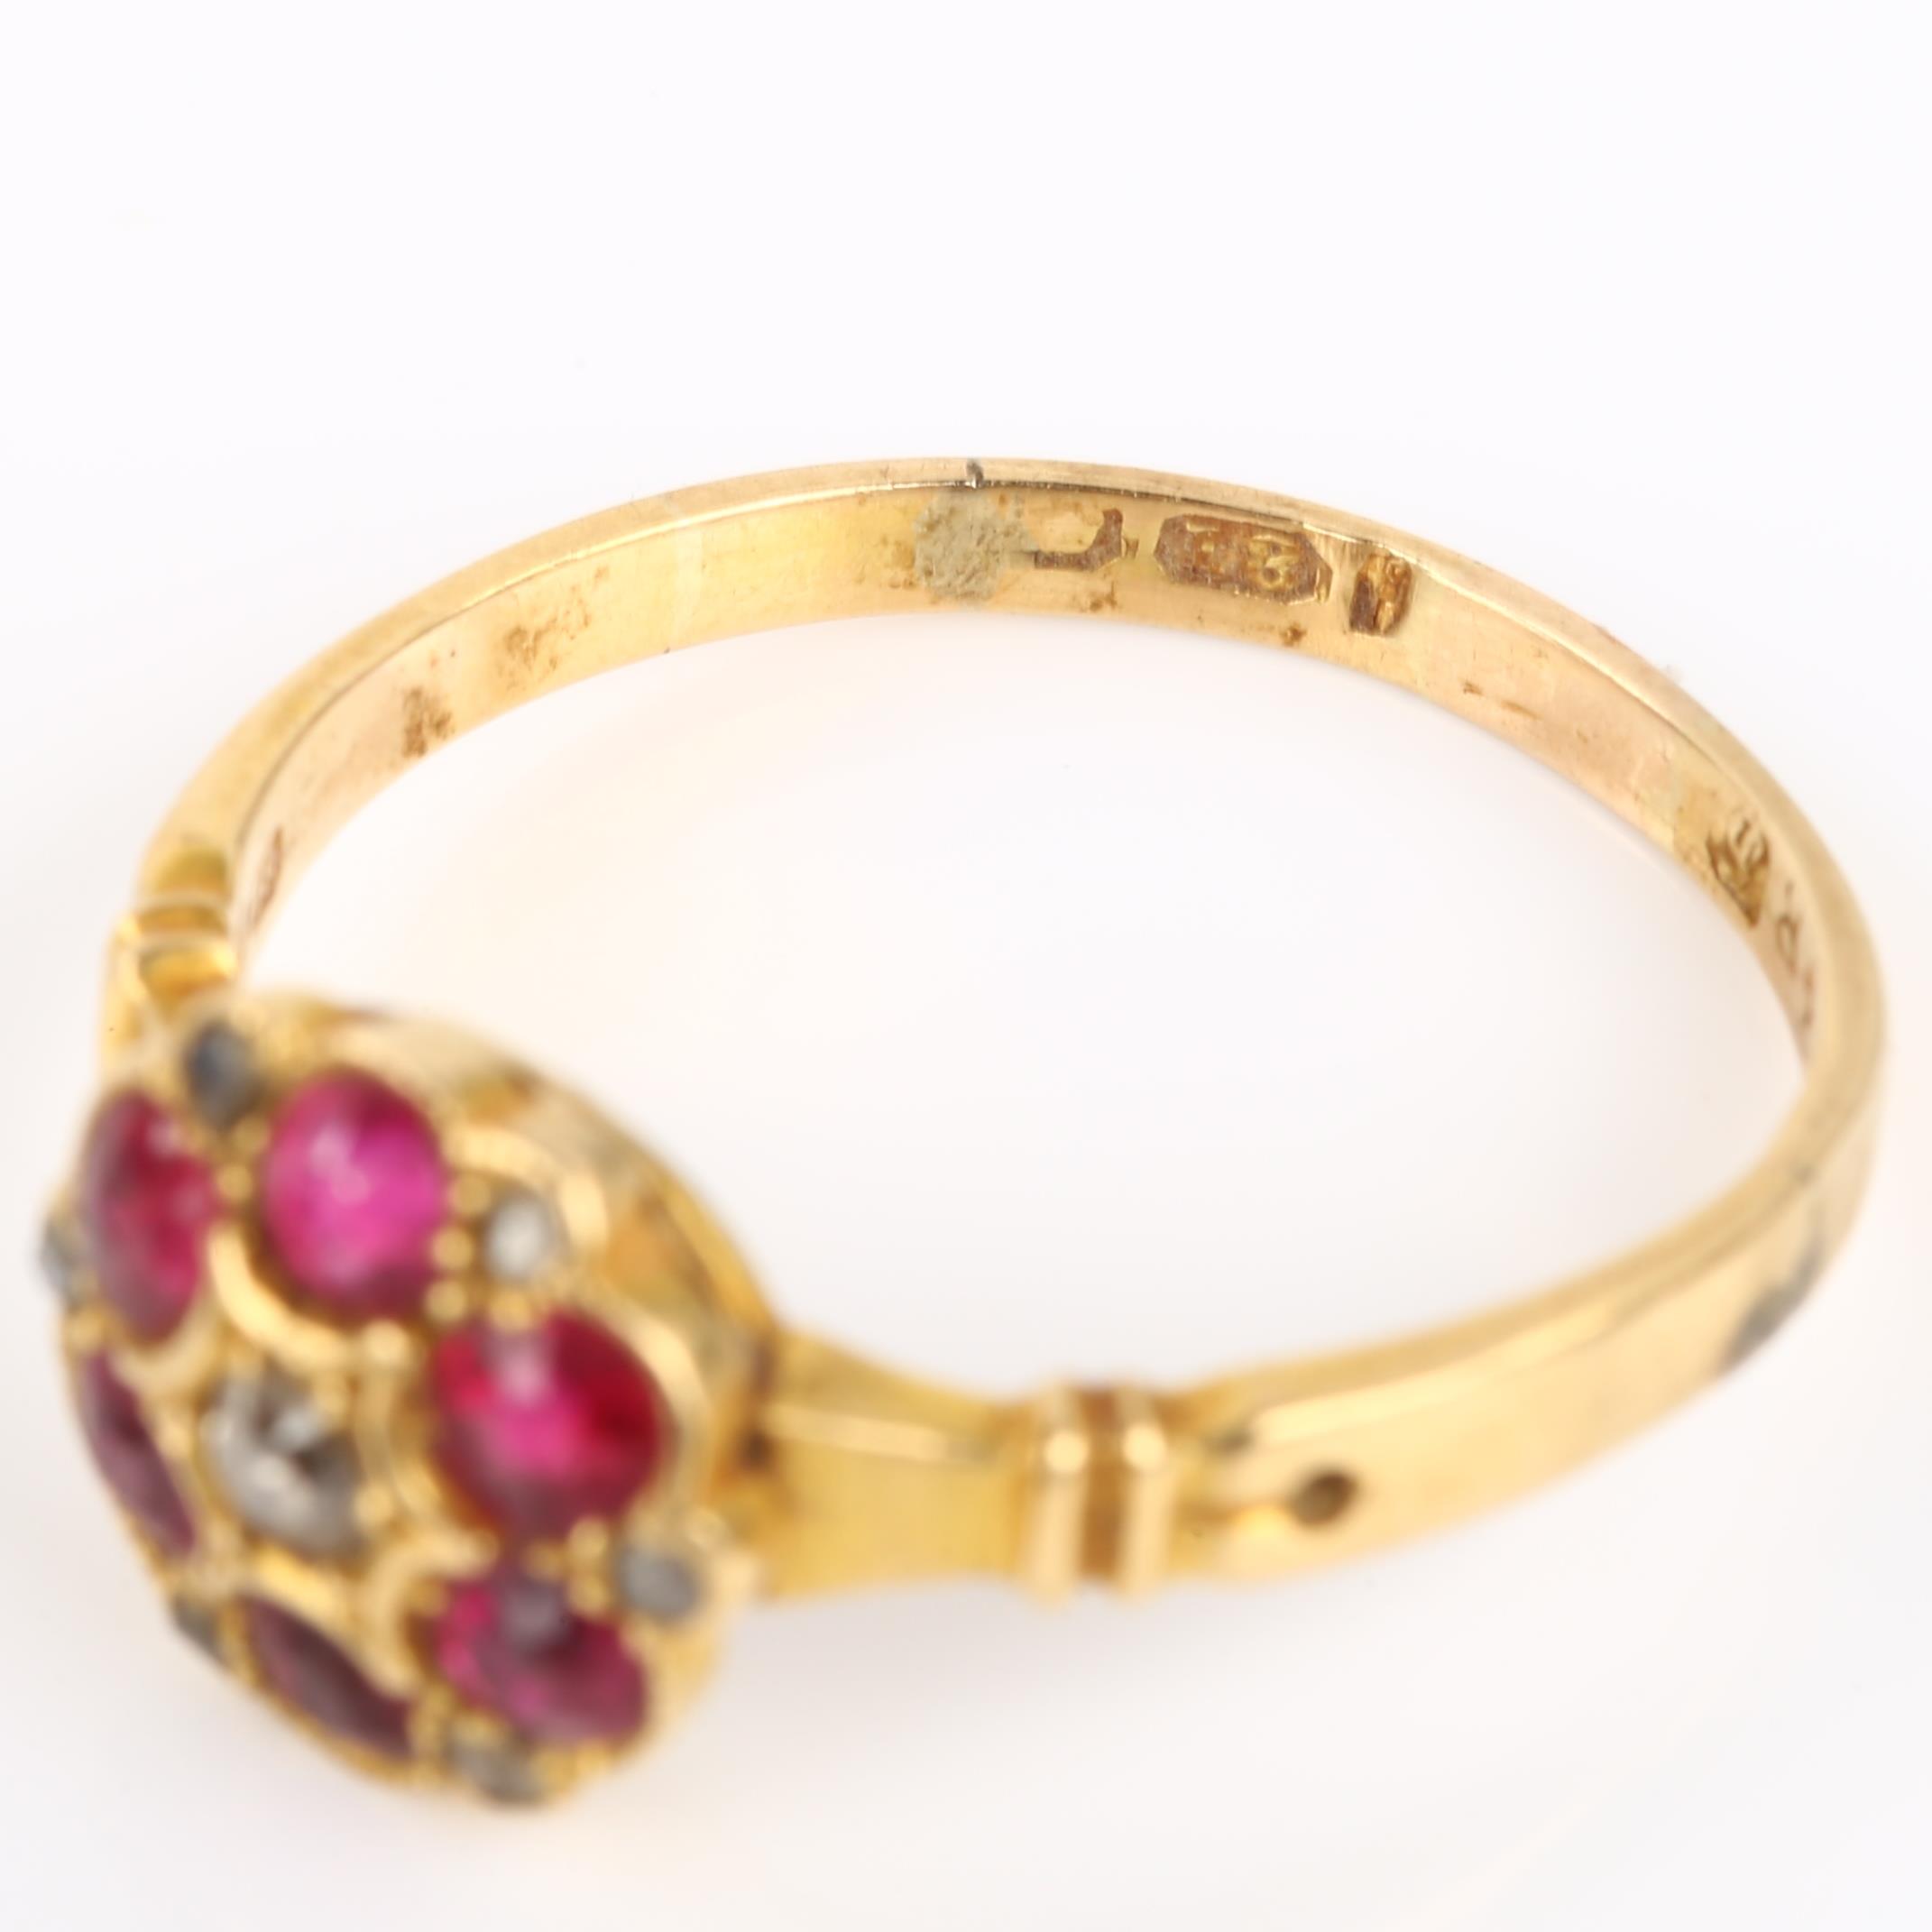 An Antique 18ct gold ruby and diamond cluster ring, set with round-cut rubies and rose-cut diamonds, - Image 3 of 4